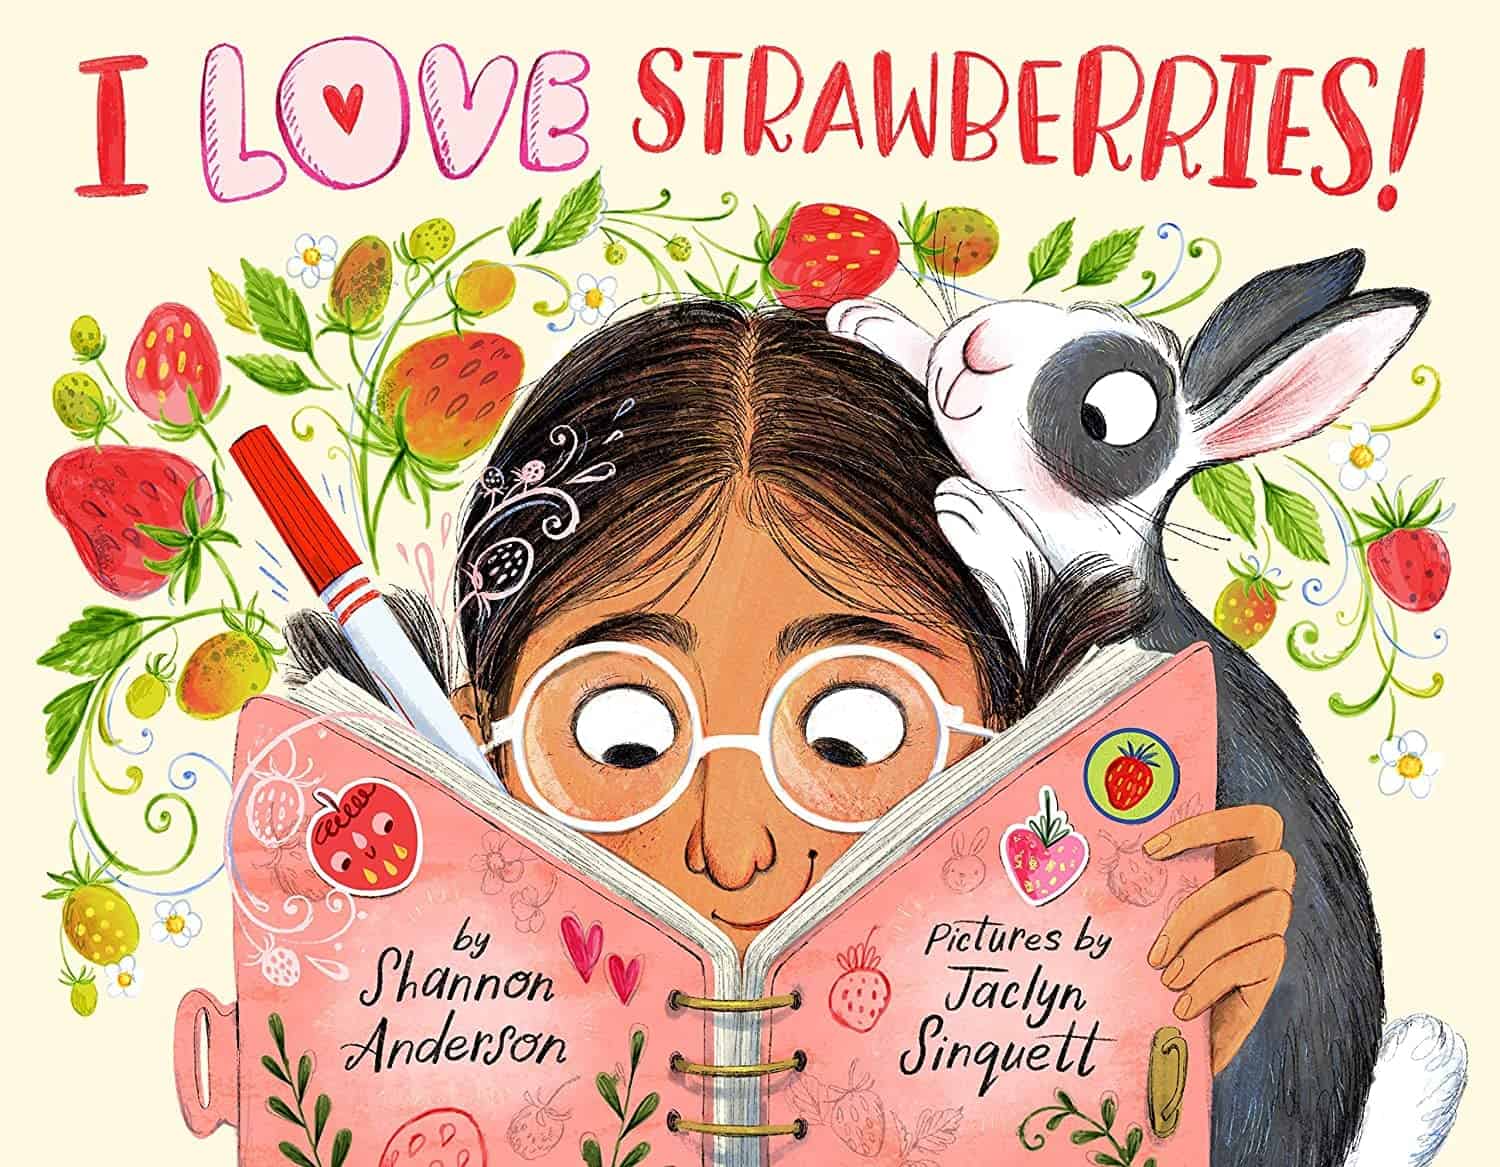 I LOVE Strawberries! by Shannon Anderson